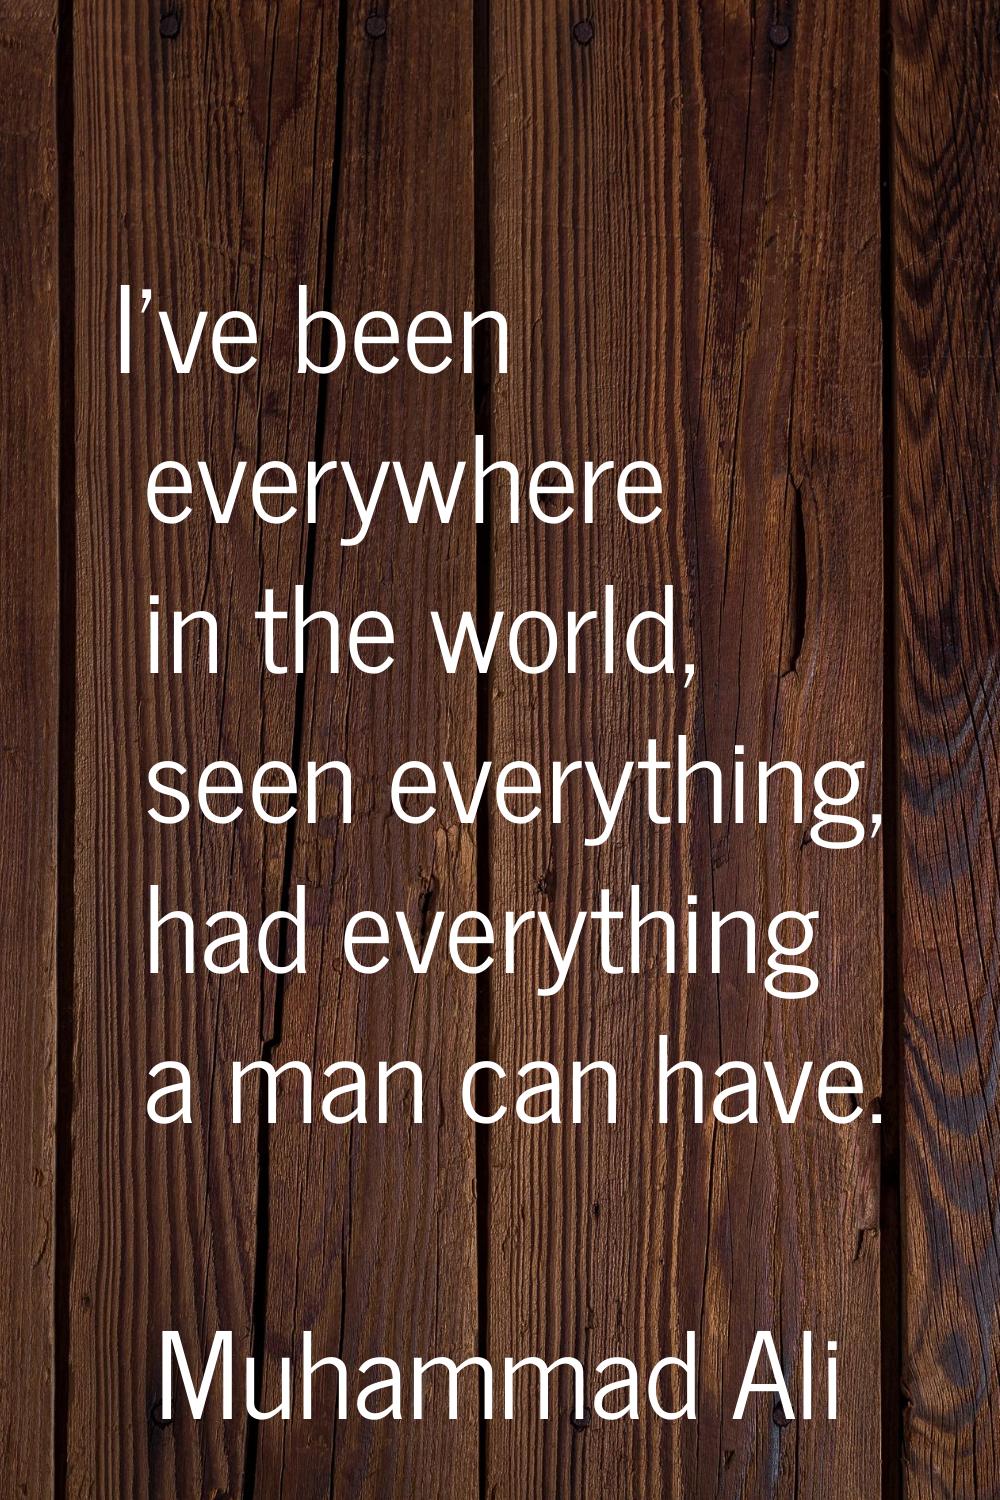 I've been everywhere in the world, seen everything, had everything a man can have.